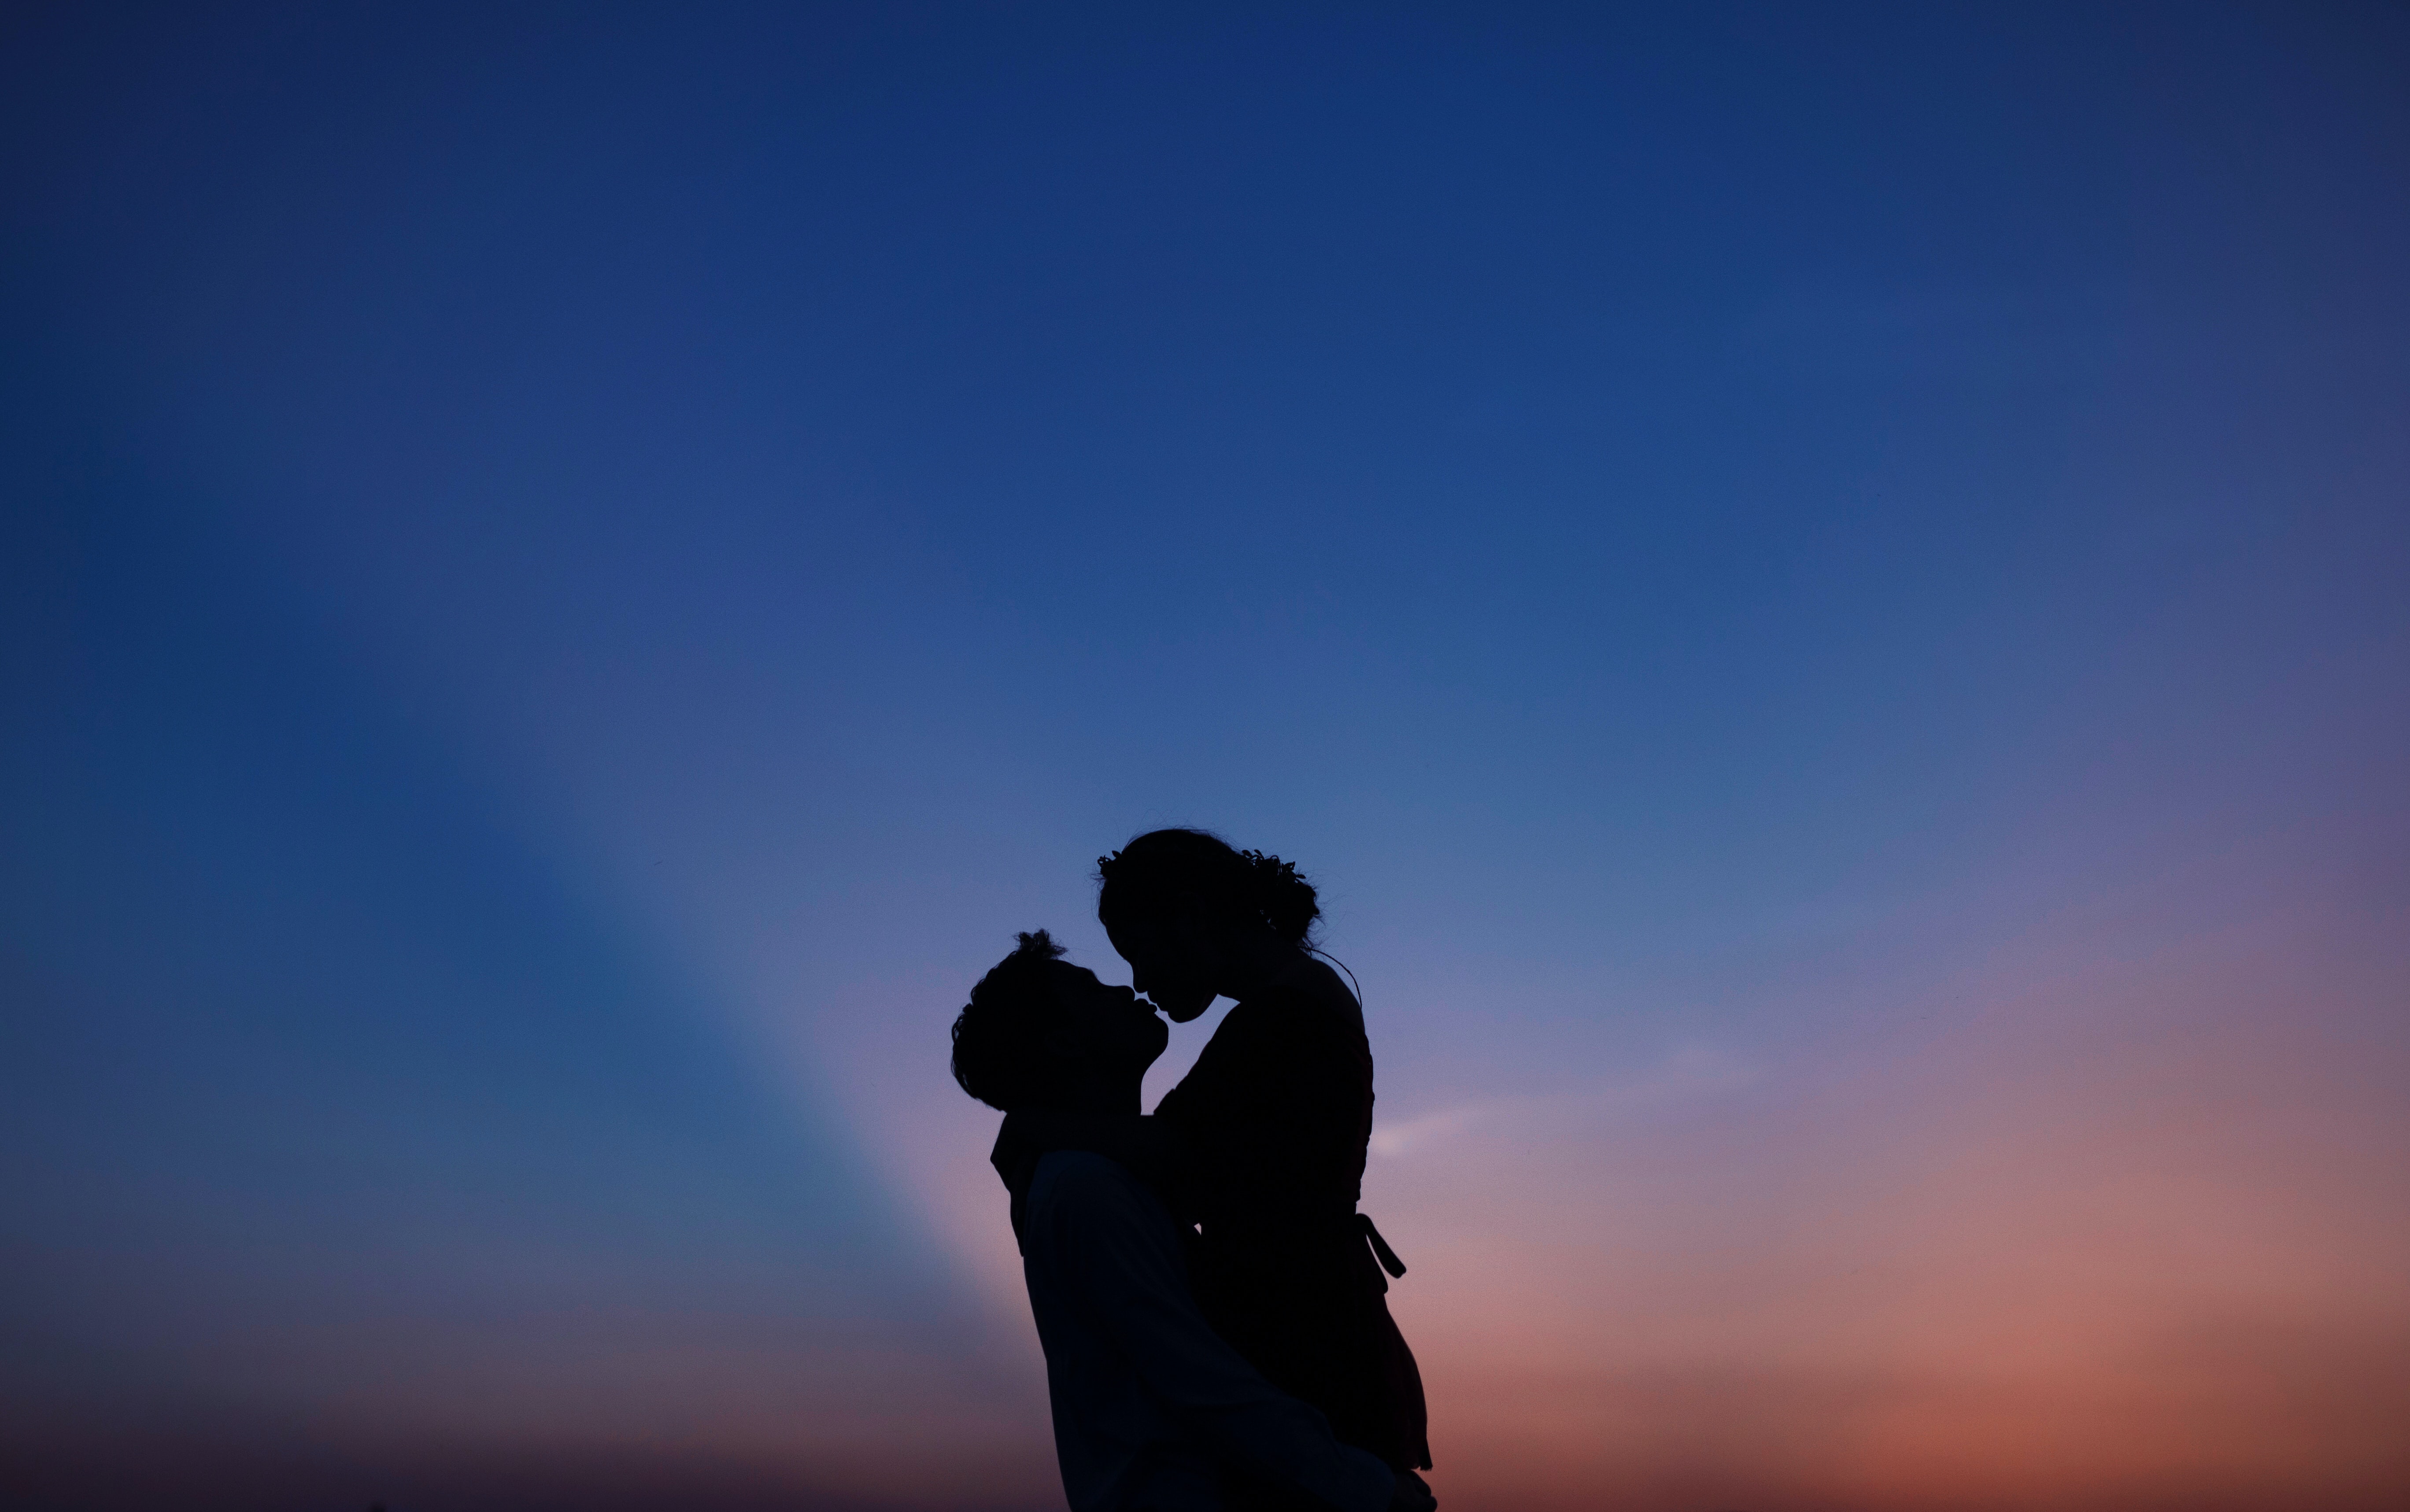 Romantic Kissing Couple Silhouette Wallpapers Wallpaper Cave Images